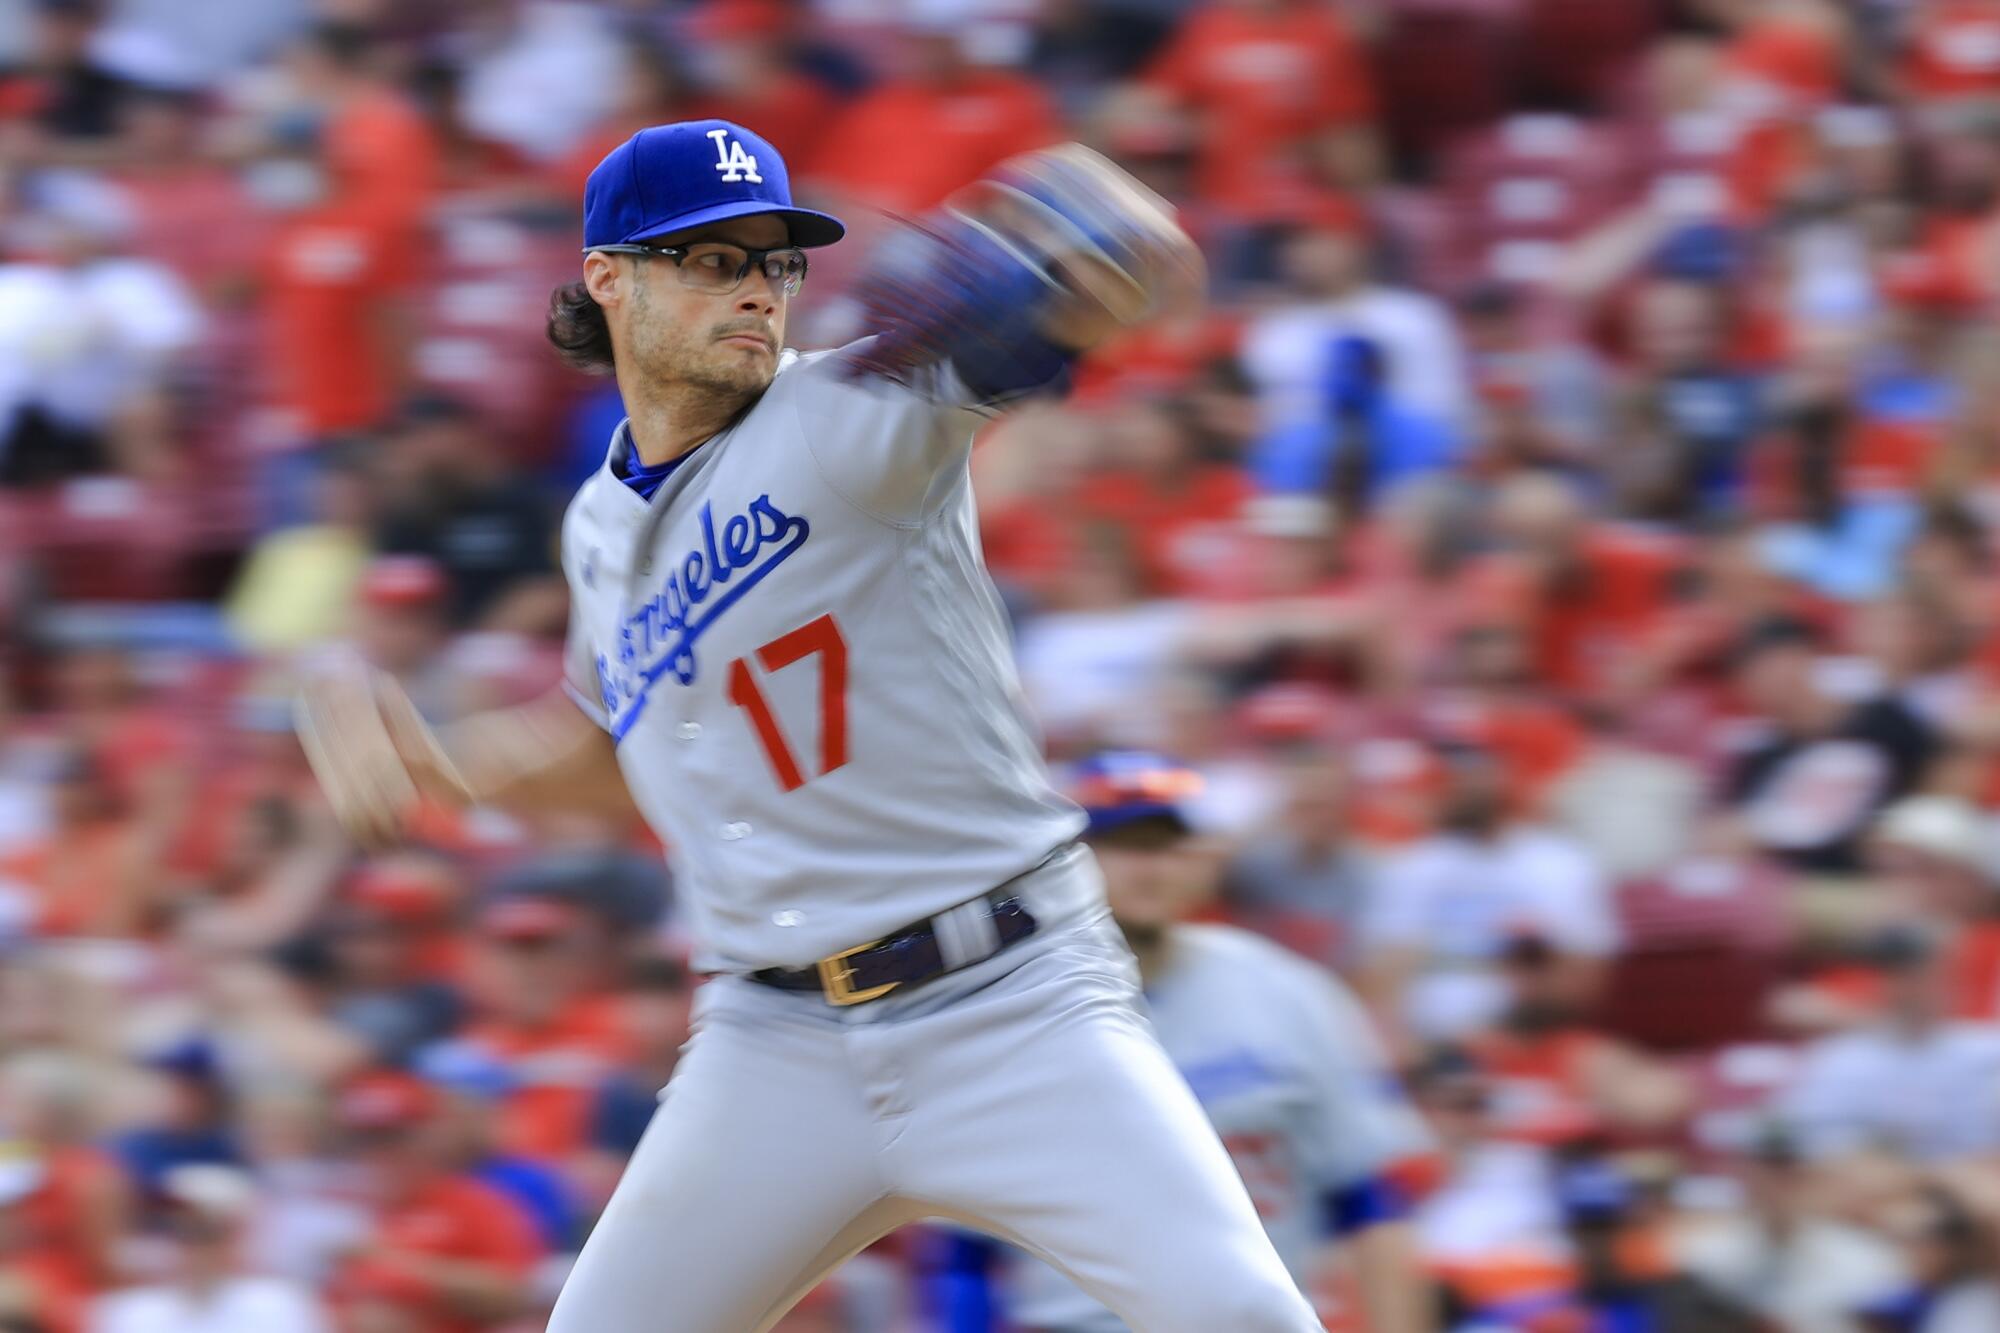 A man in a Dodgers uniform pitches a baseball.